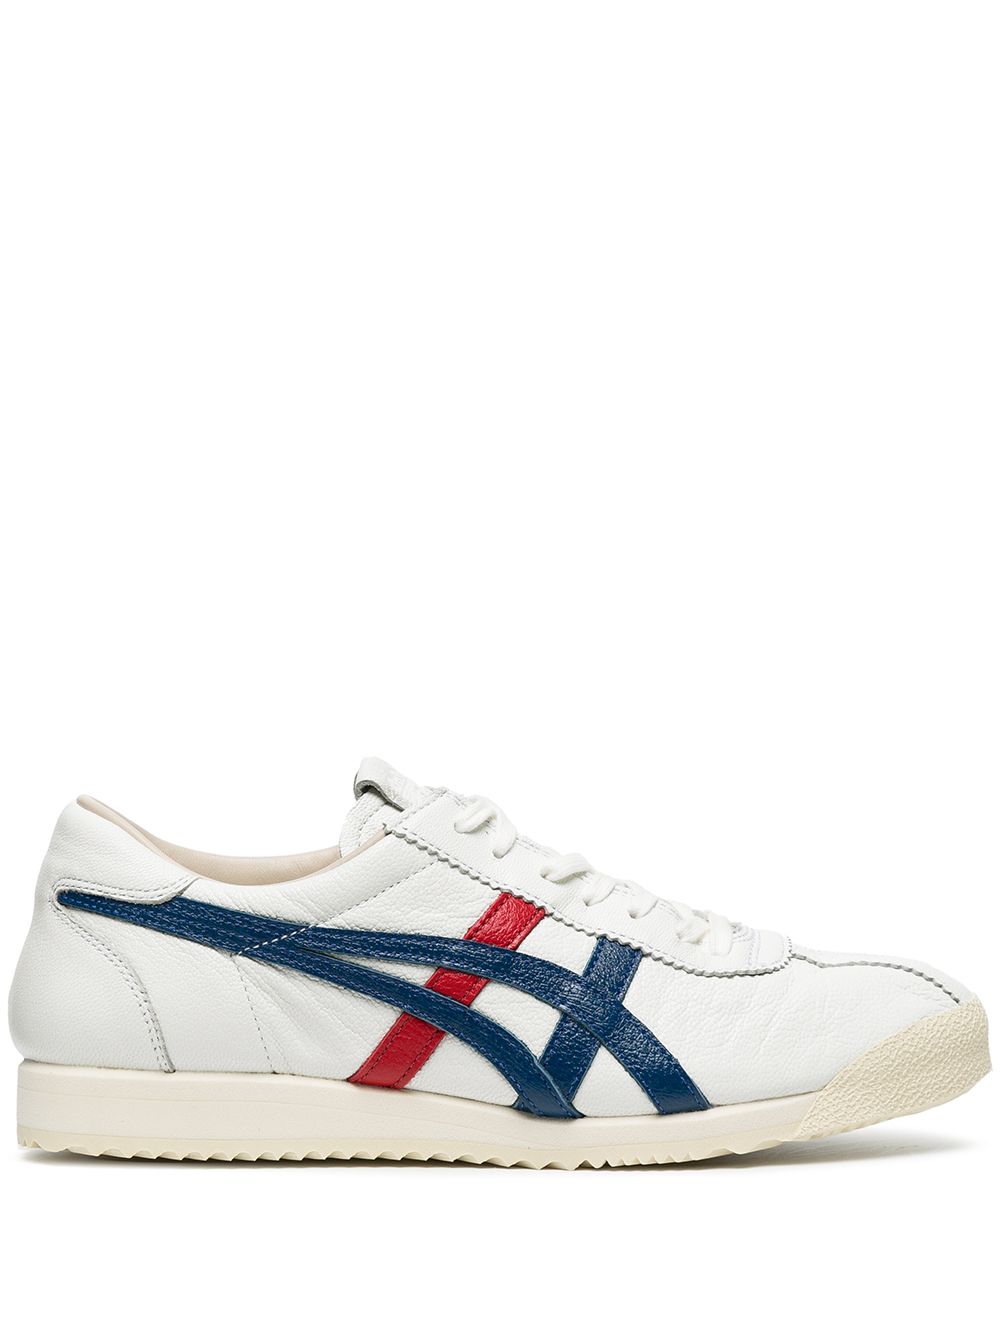 Onitsuka Tiger Corsair Deluxe low-top Sneakers - Farfetch